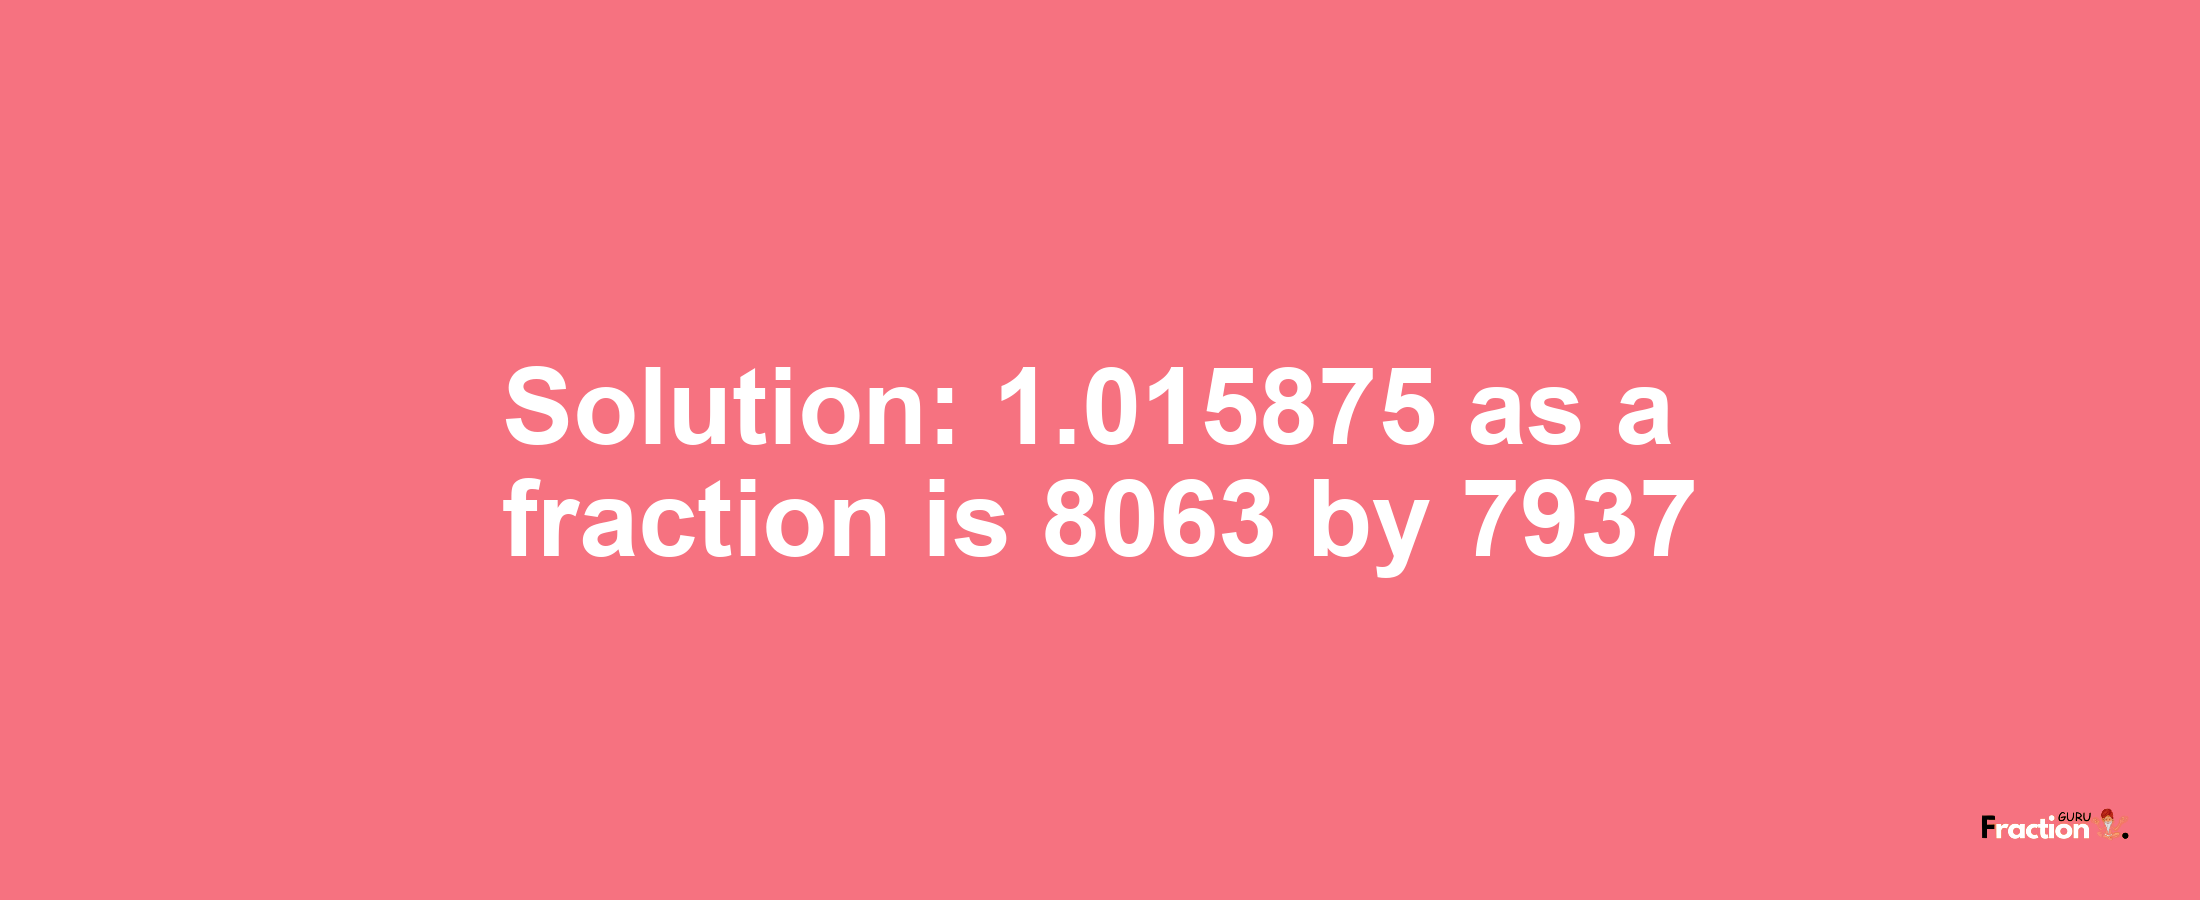 Solution:1.015875 as a fraction is 8063/7937